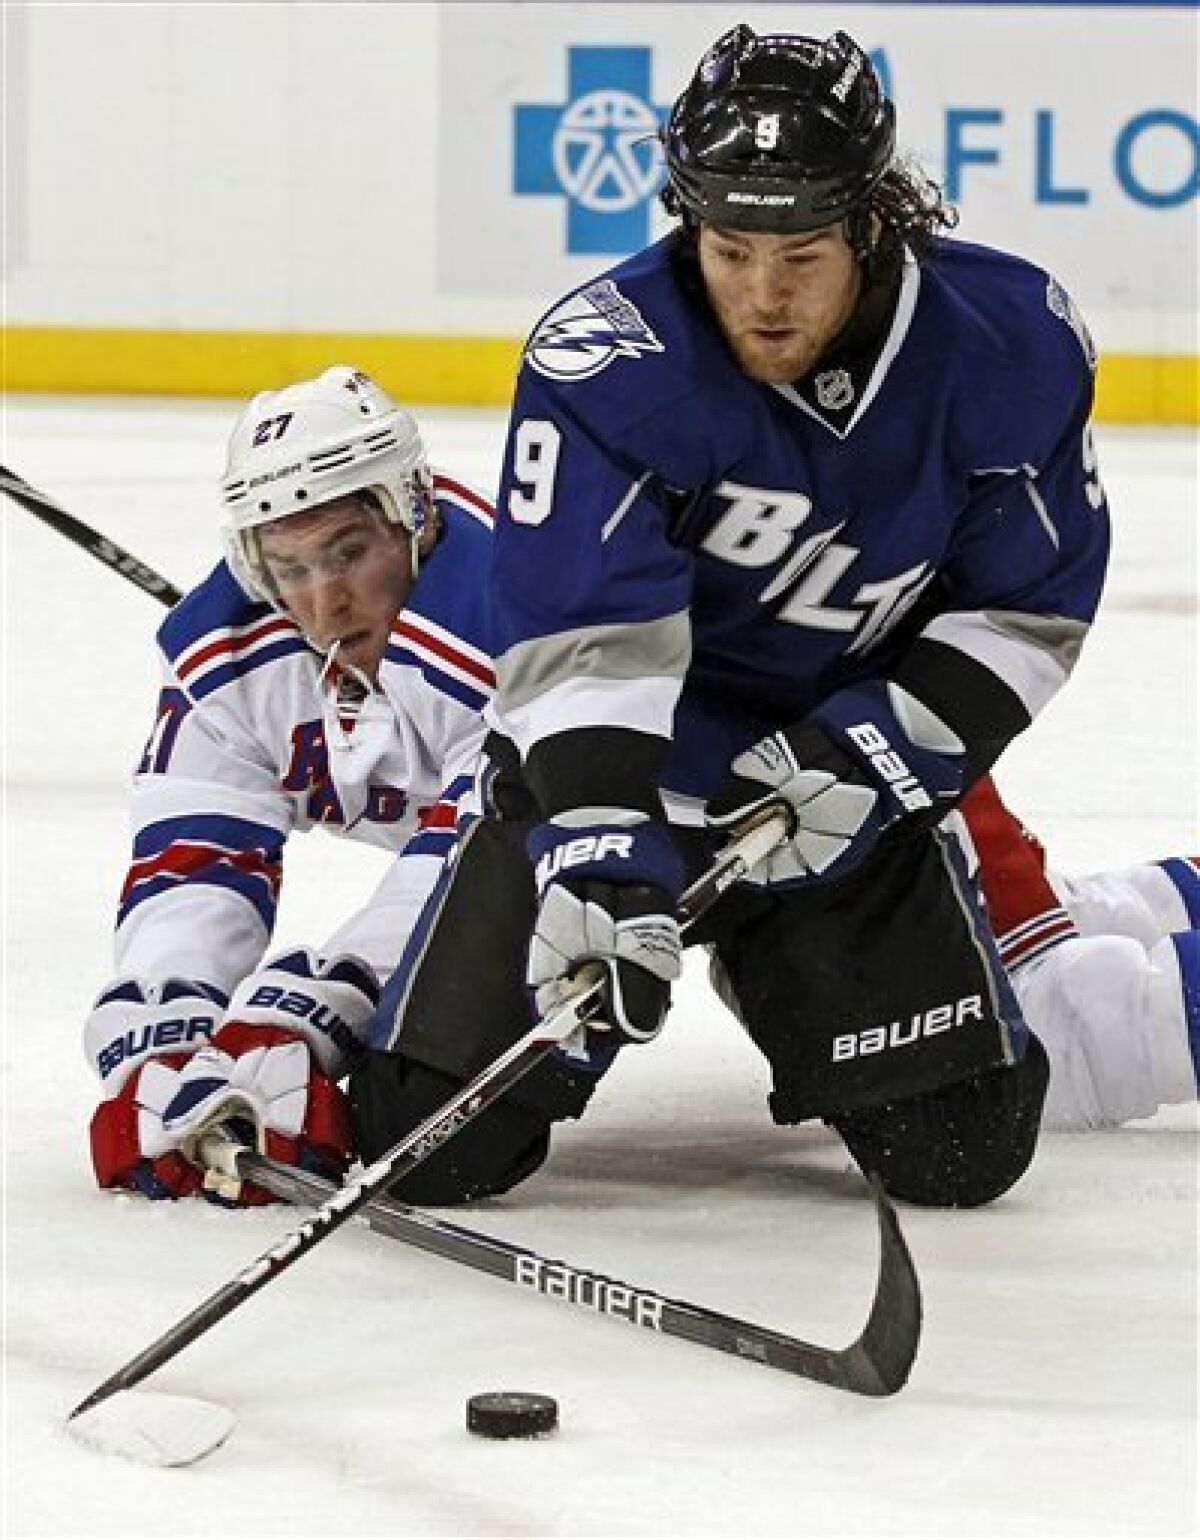 Tampa Bay Lightning's Steve Downie, right, and New York Rangers' Ryan McDonagh battle for a loose puck during the second period of an NHL hockey game, Saturday, Dec. 3, 2011, in Tampa, Fla. (AP Photo/Mike Carlson)